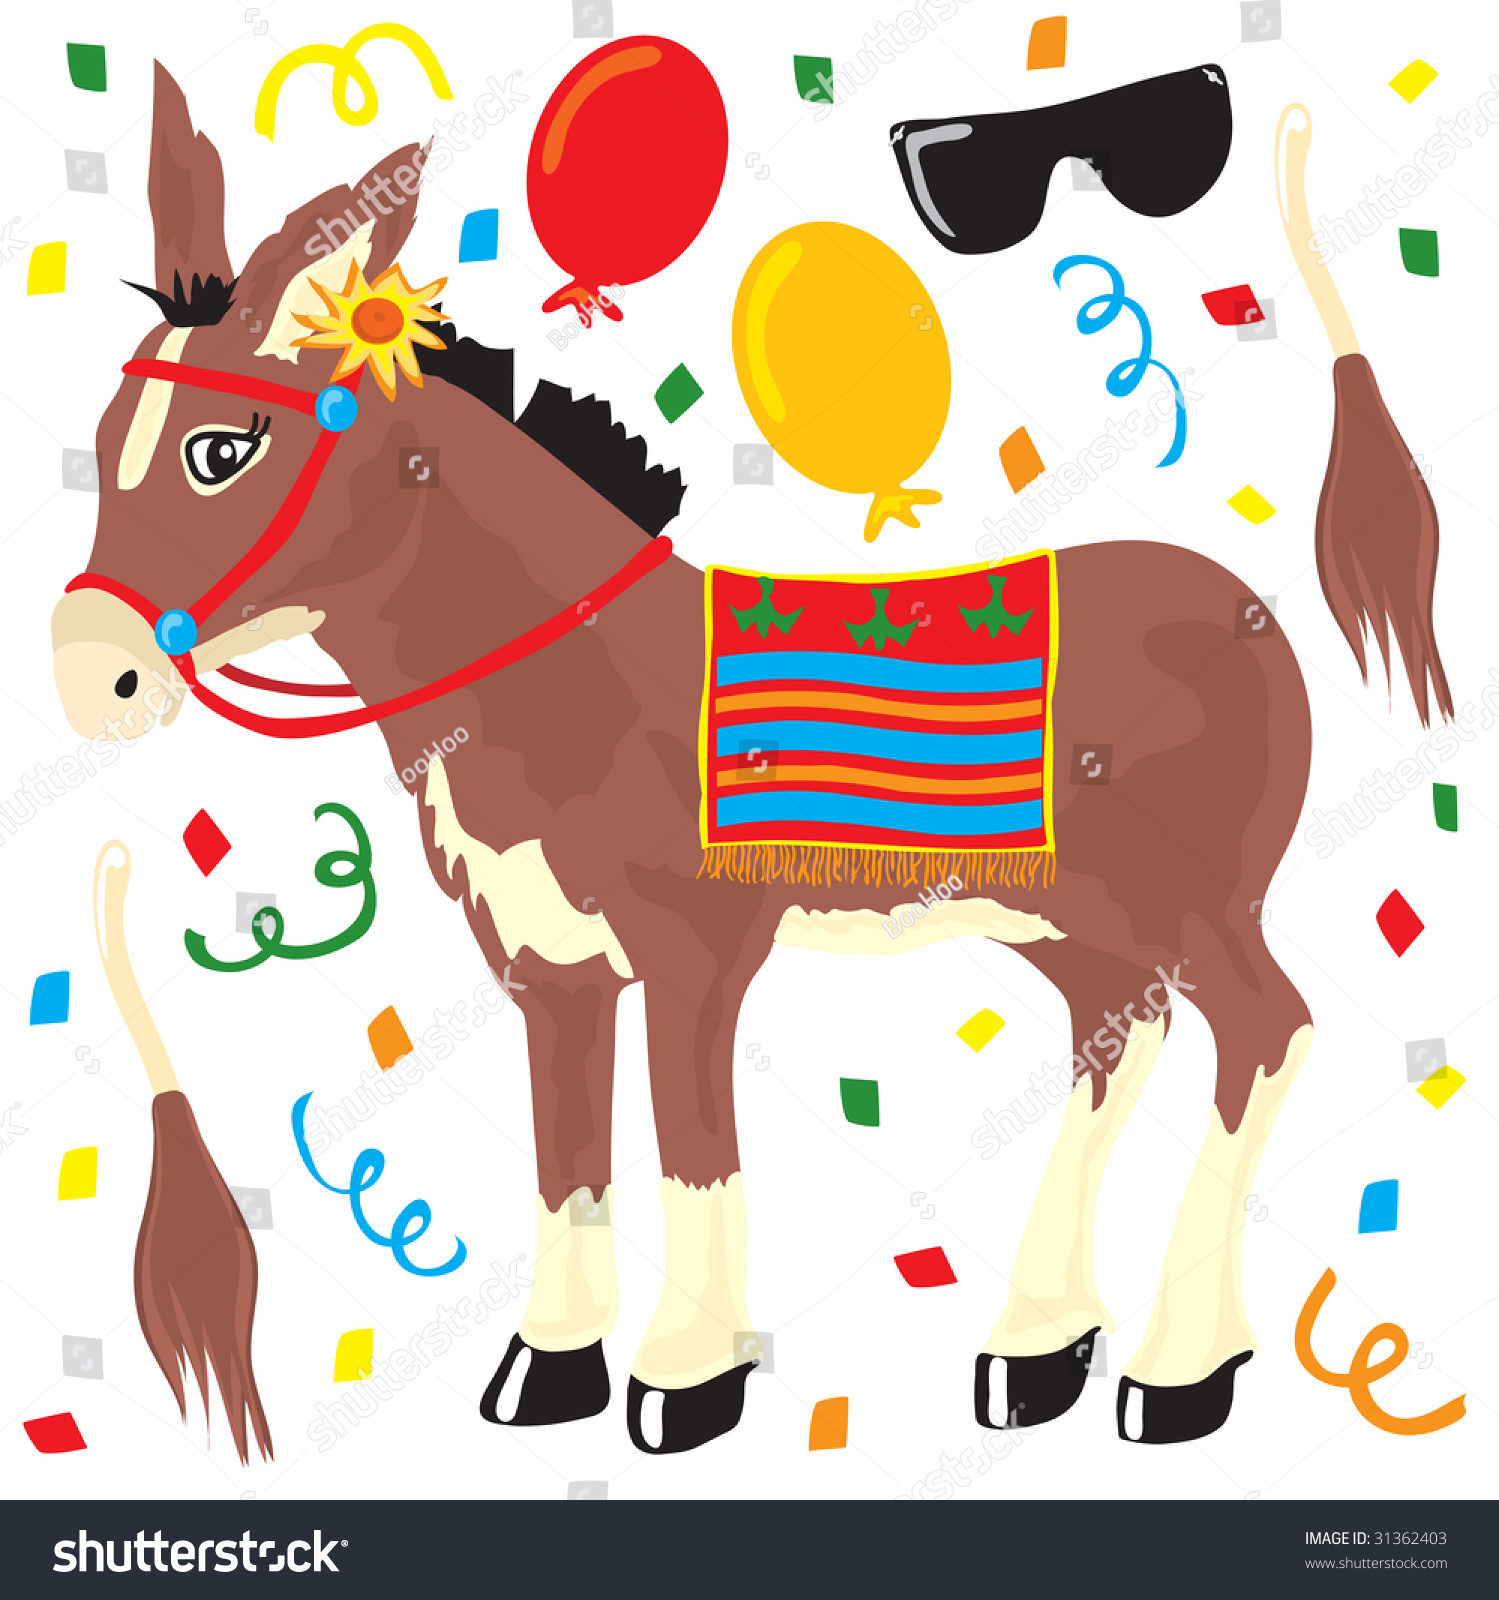 Pin Tail On Donkey Party Elements Stock Vector (Royalty Free - Pin The Tail On The Donkey Printable Free